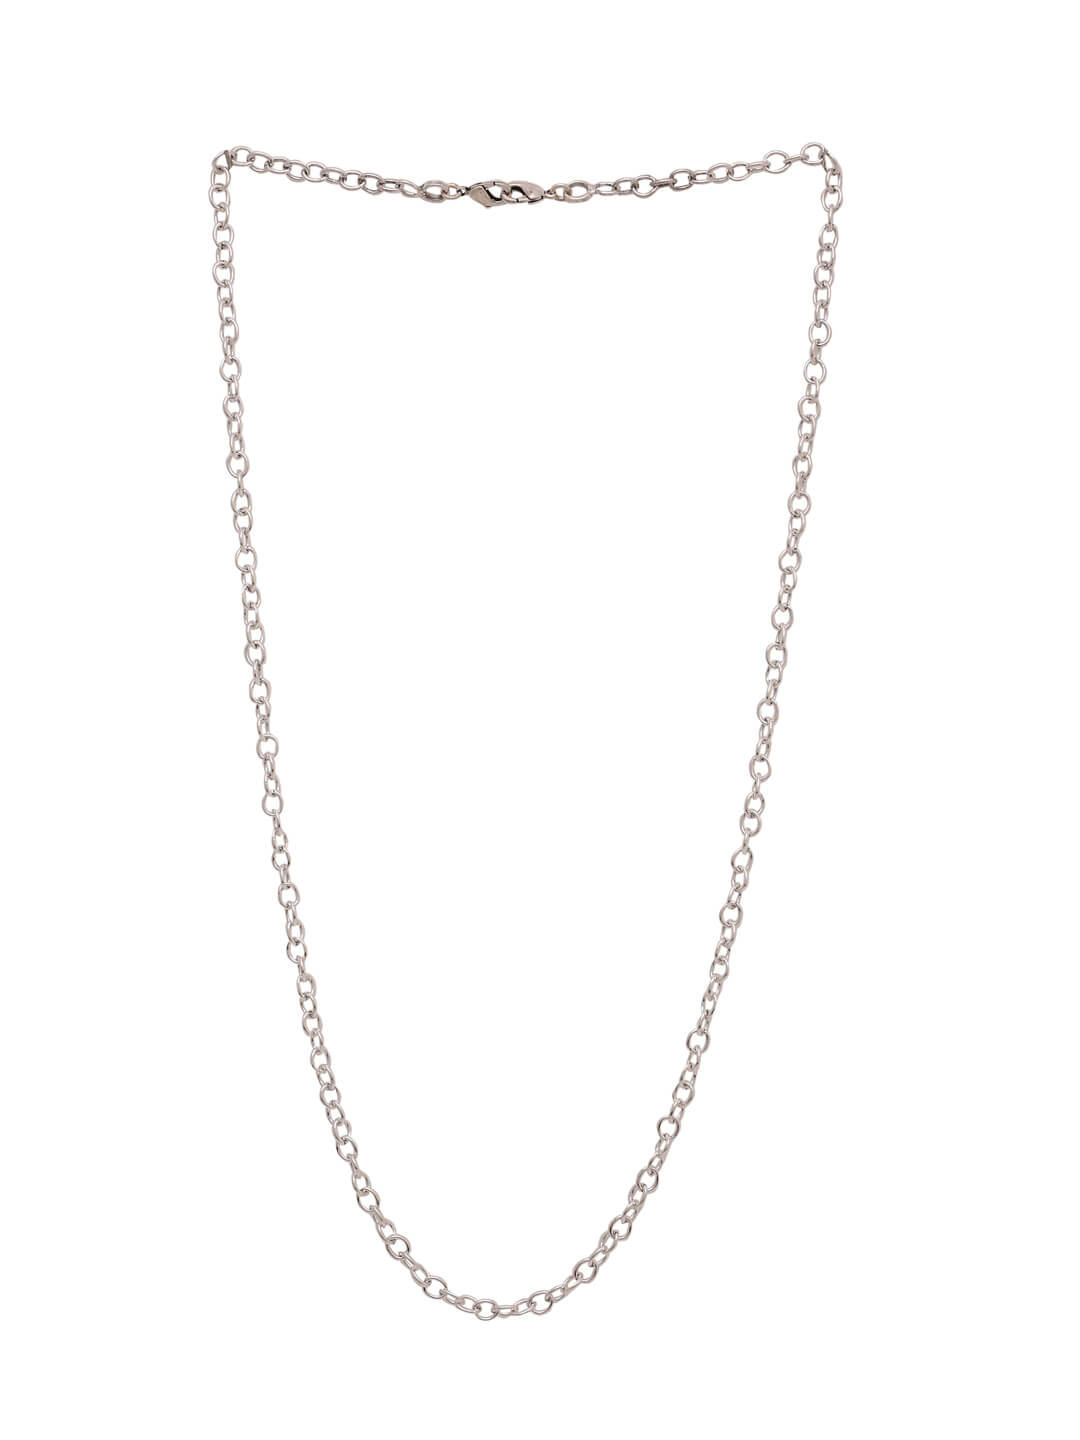 silver-plated-cable-design-mask-chain-3-in-1-viraasi